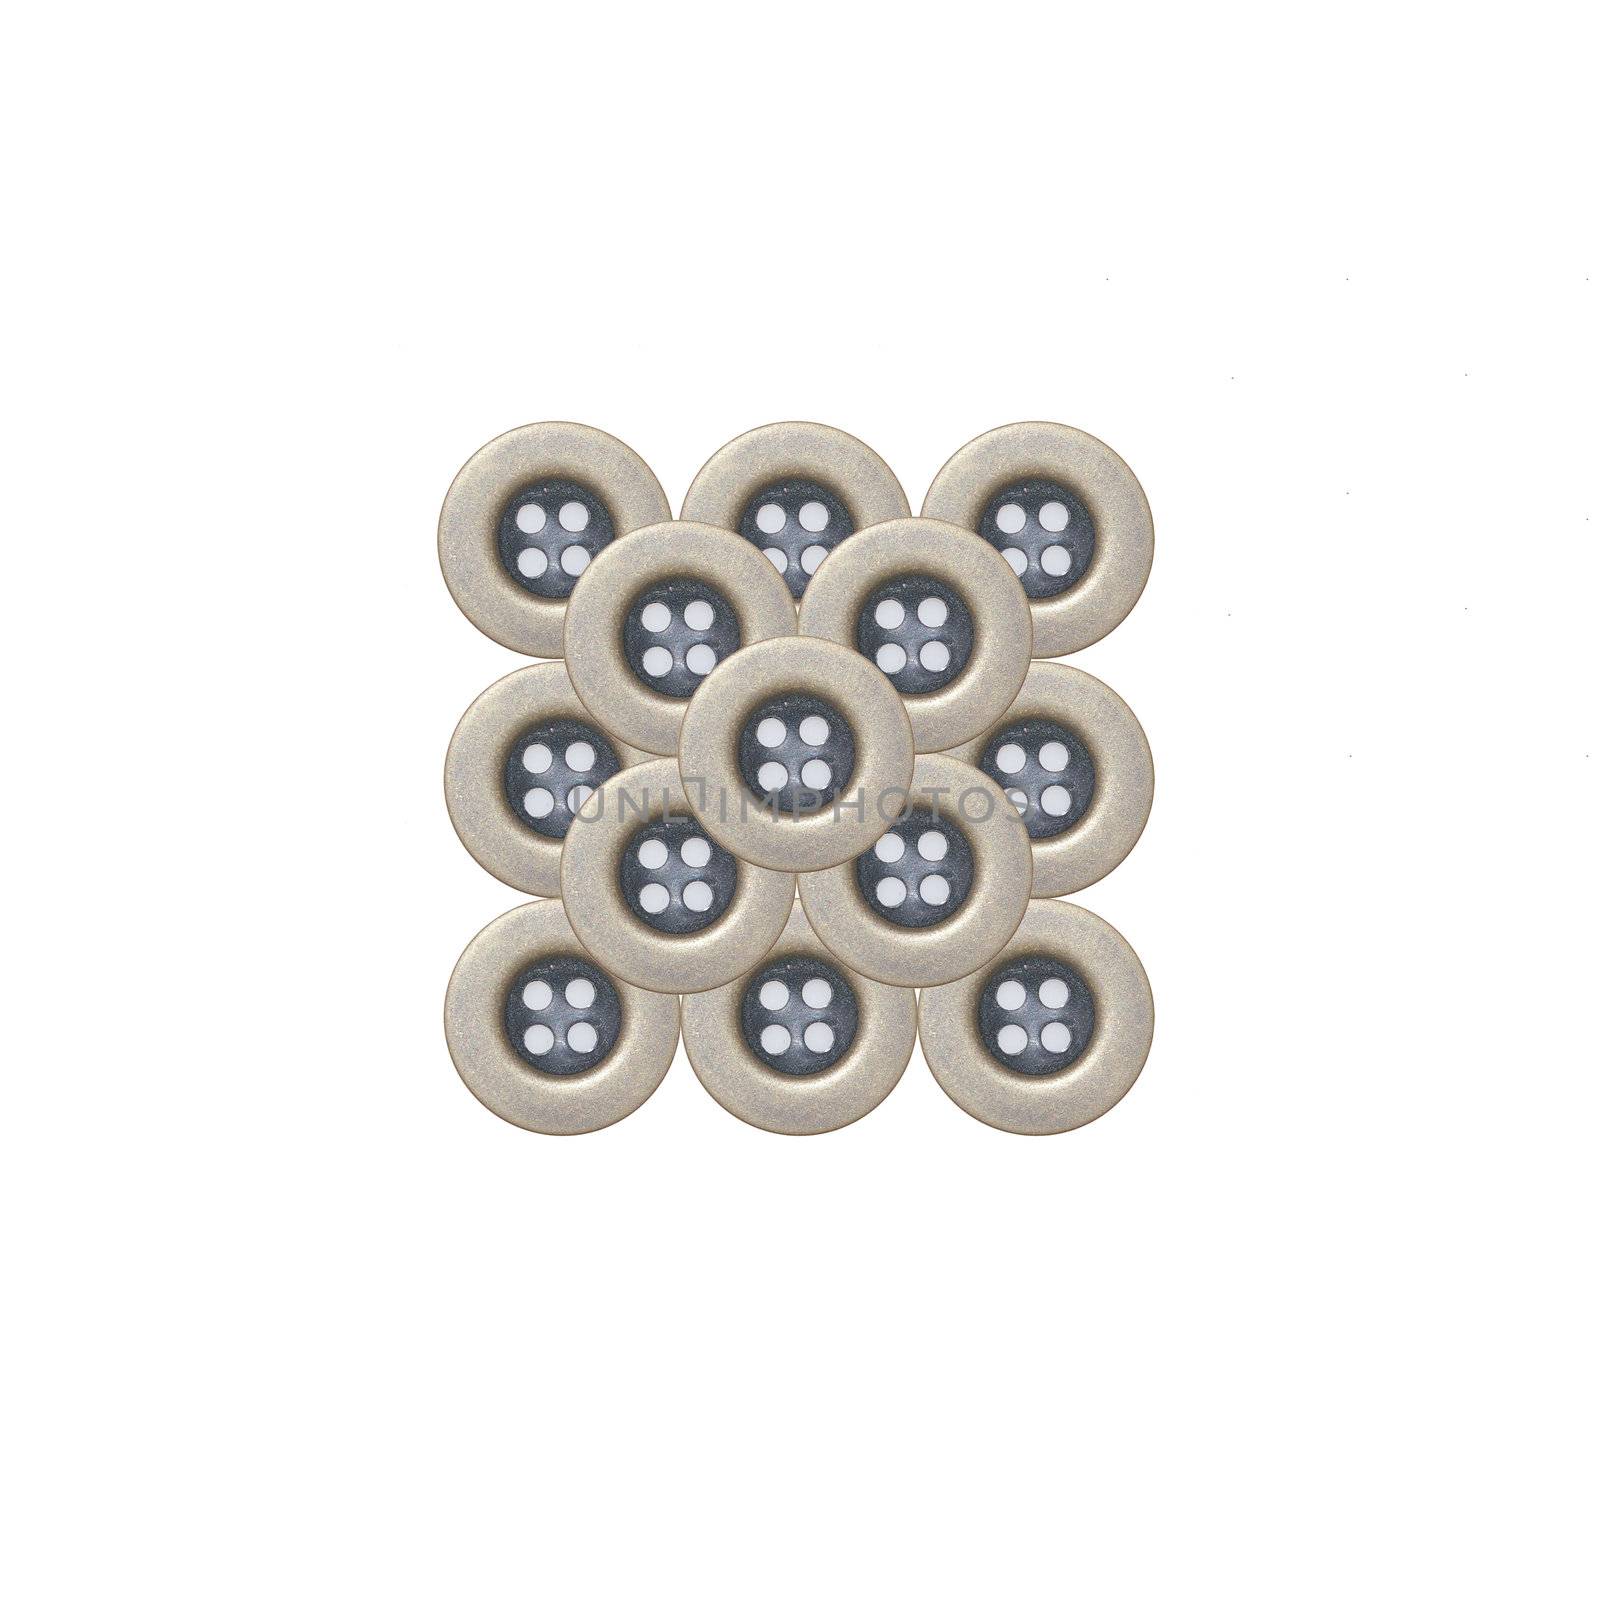 Cloth buttons isolated on white background by kawing921